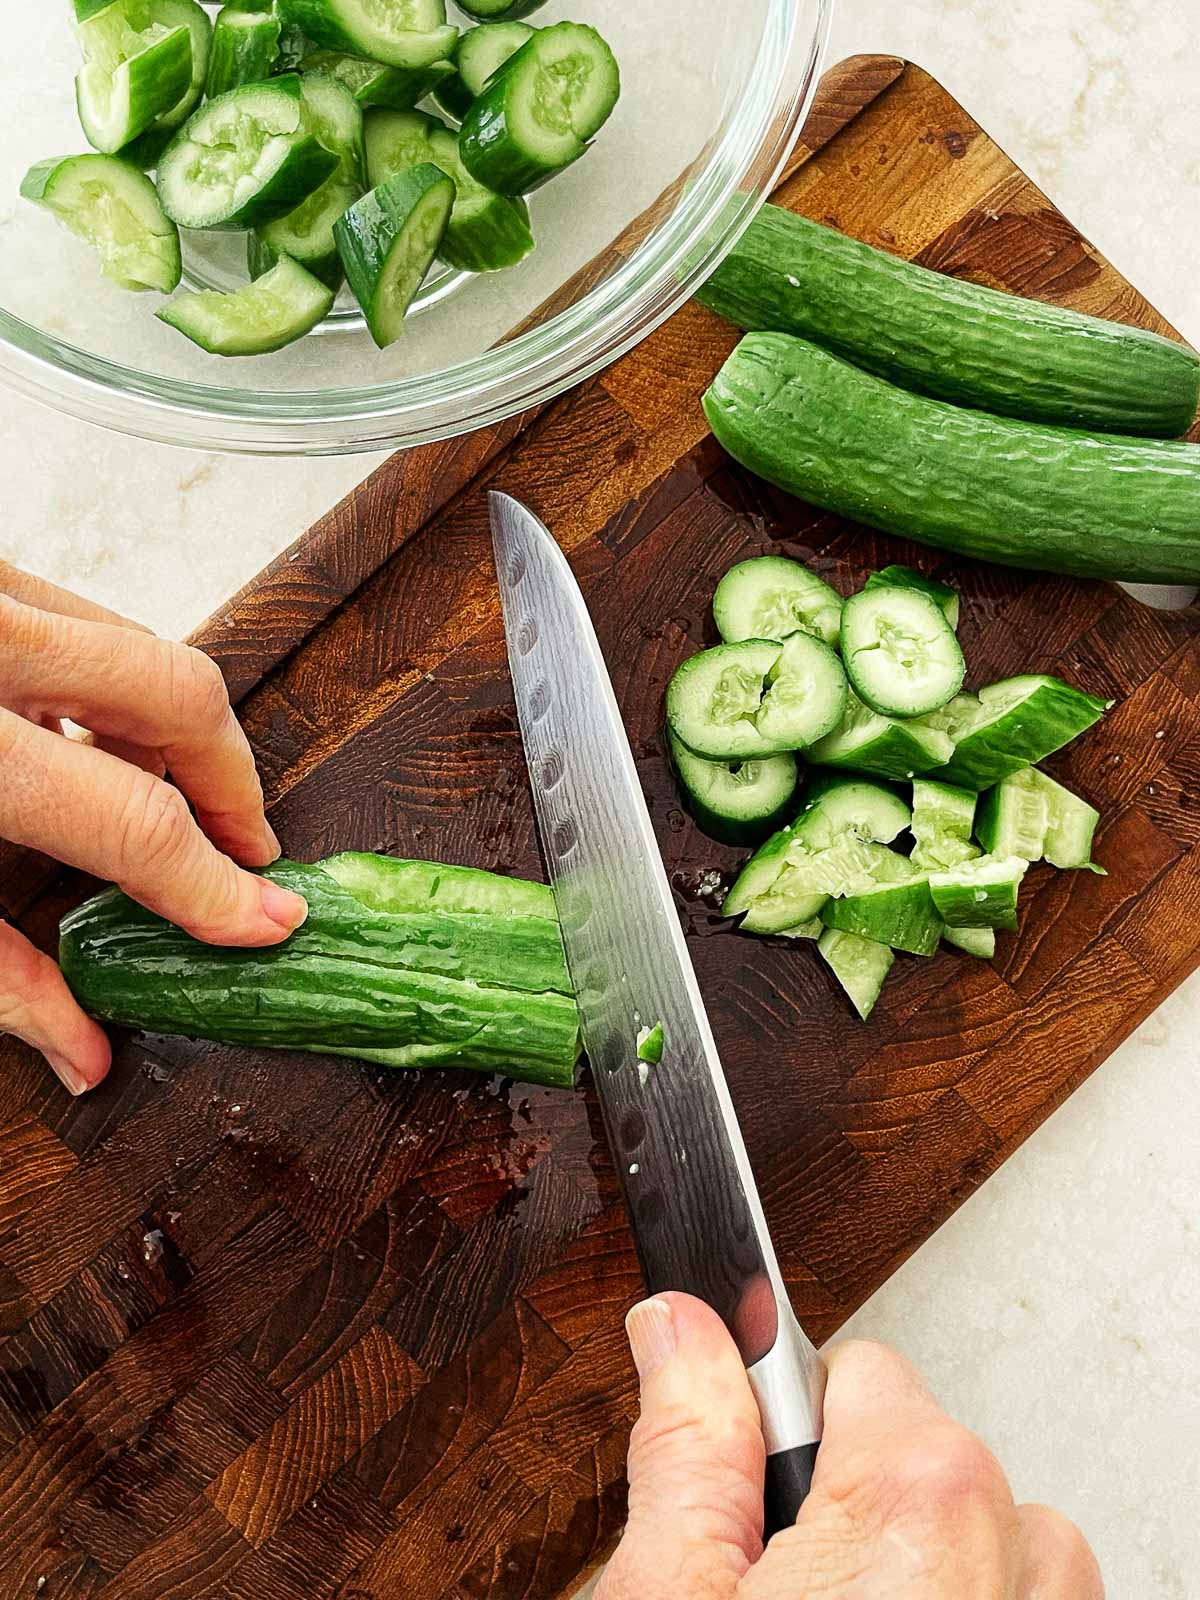 Persian cucumbers being sliced on top of a wooden cutting board with a glass bowl filled with sliced cucumbers on the side.